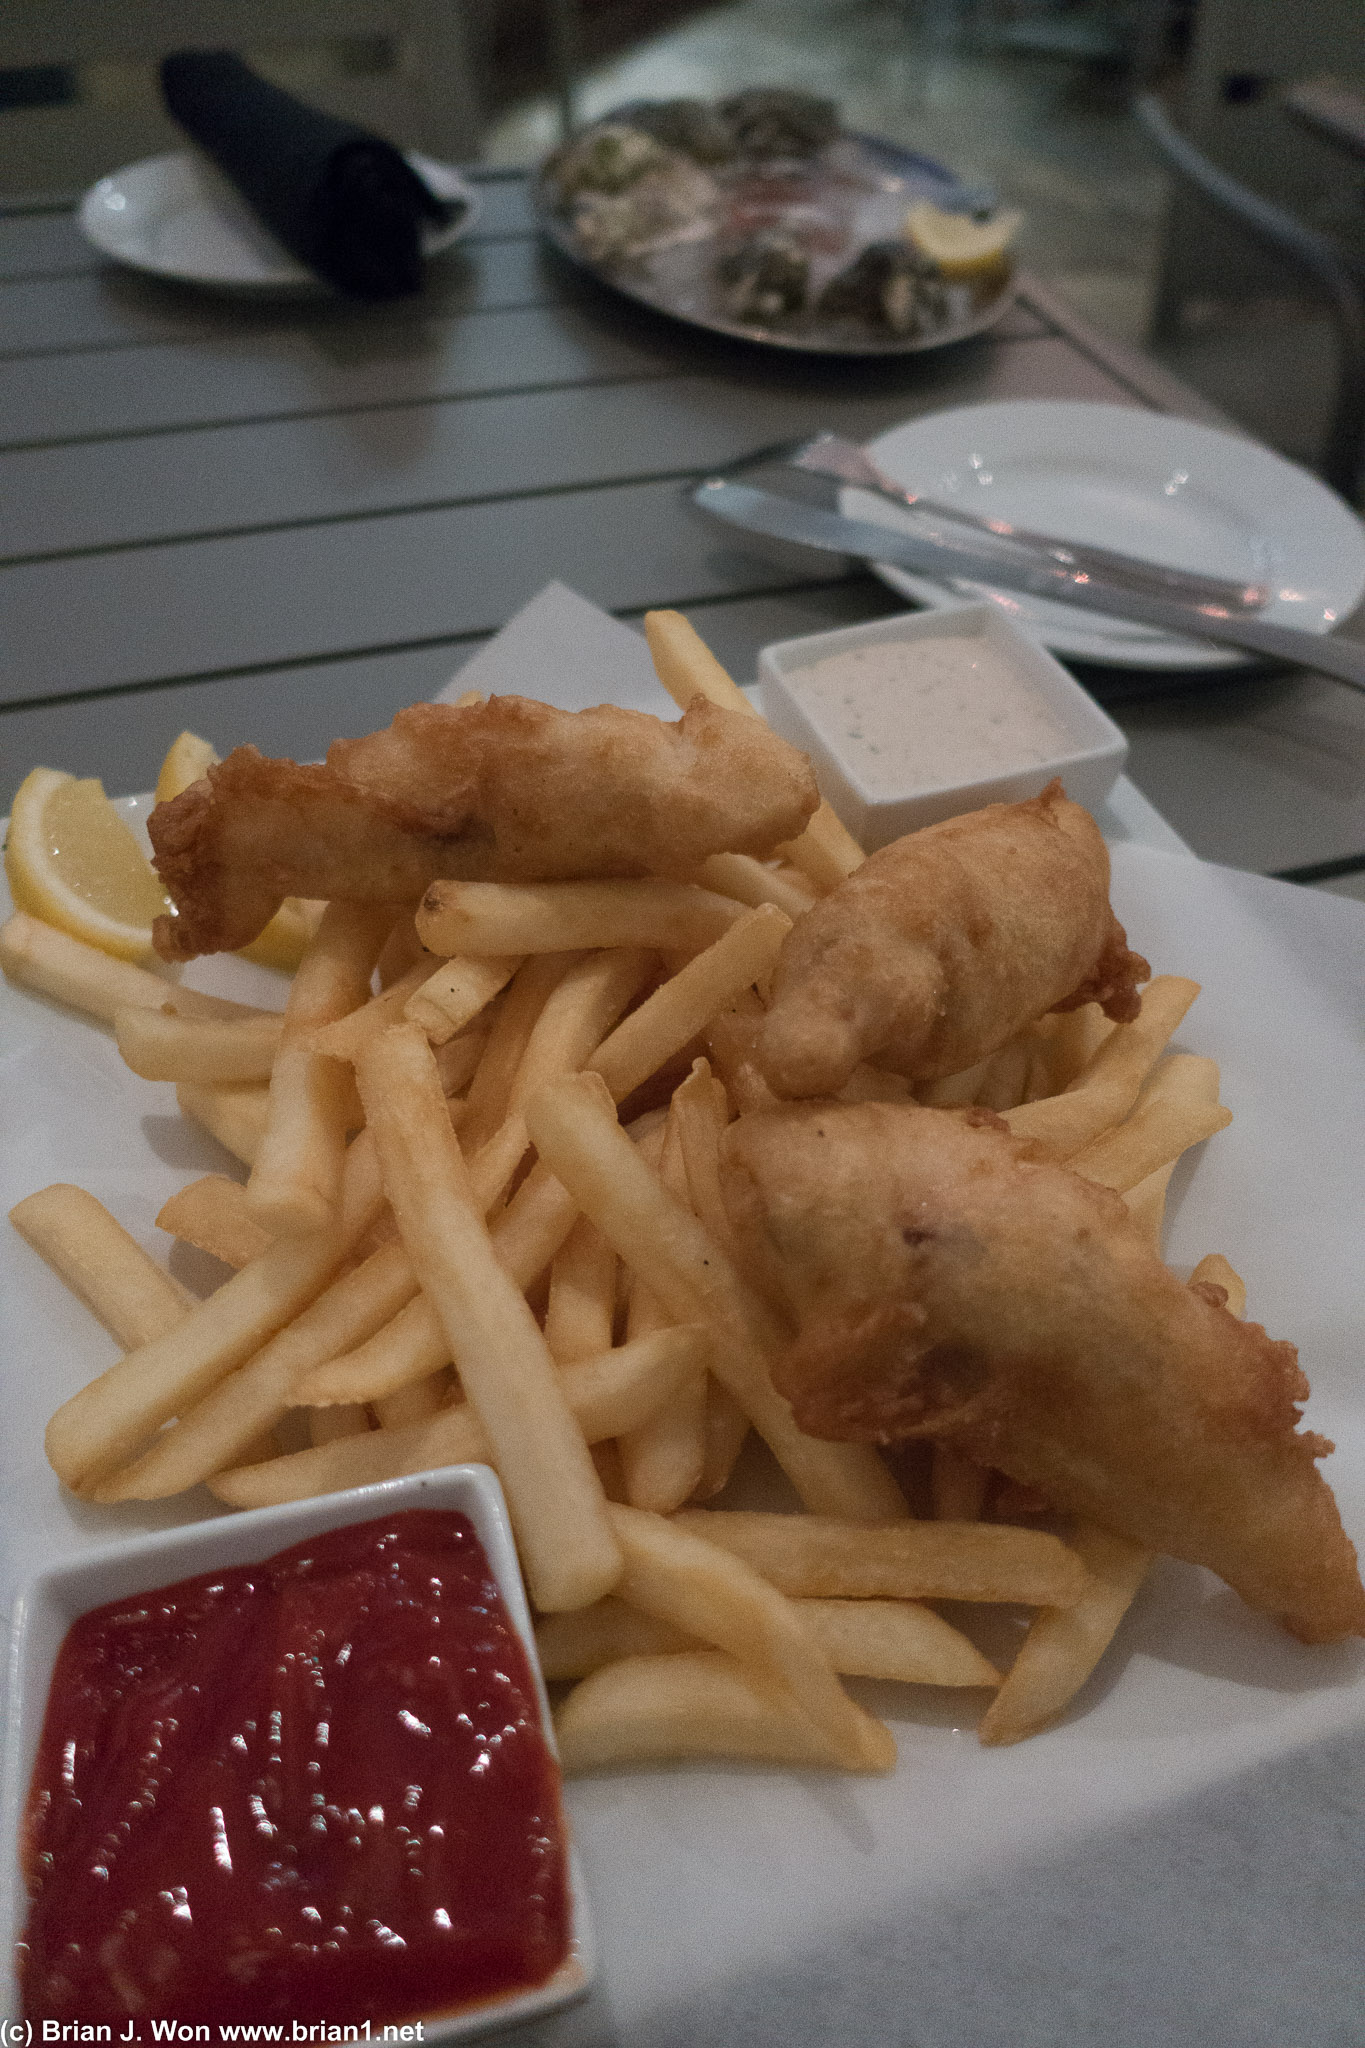 Very fresh fish and chips. Red snapper, I think it was?